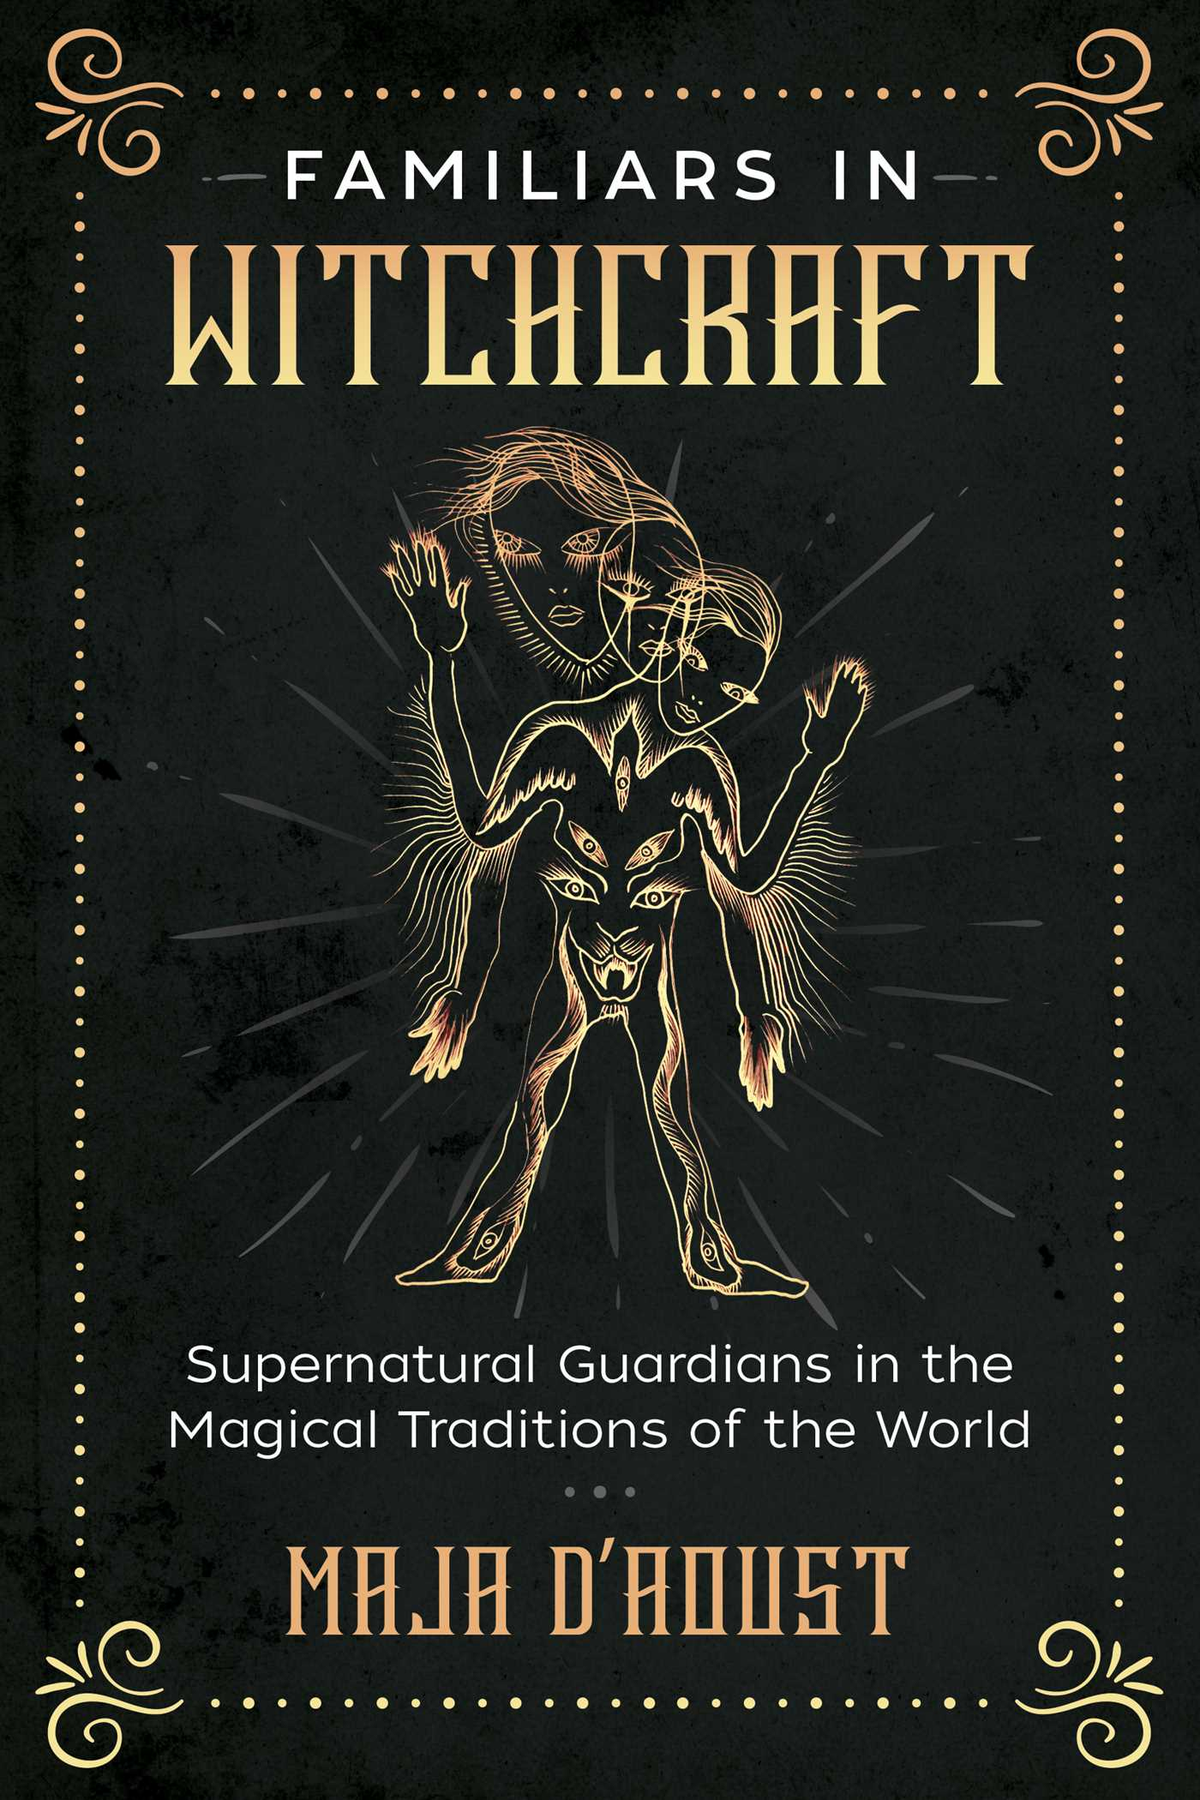 Familiars in Witchcraft - Supernatural Guardians in the Magical Traditions of the World